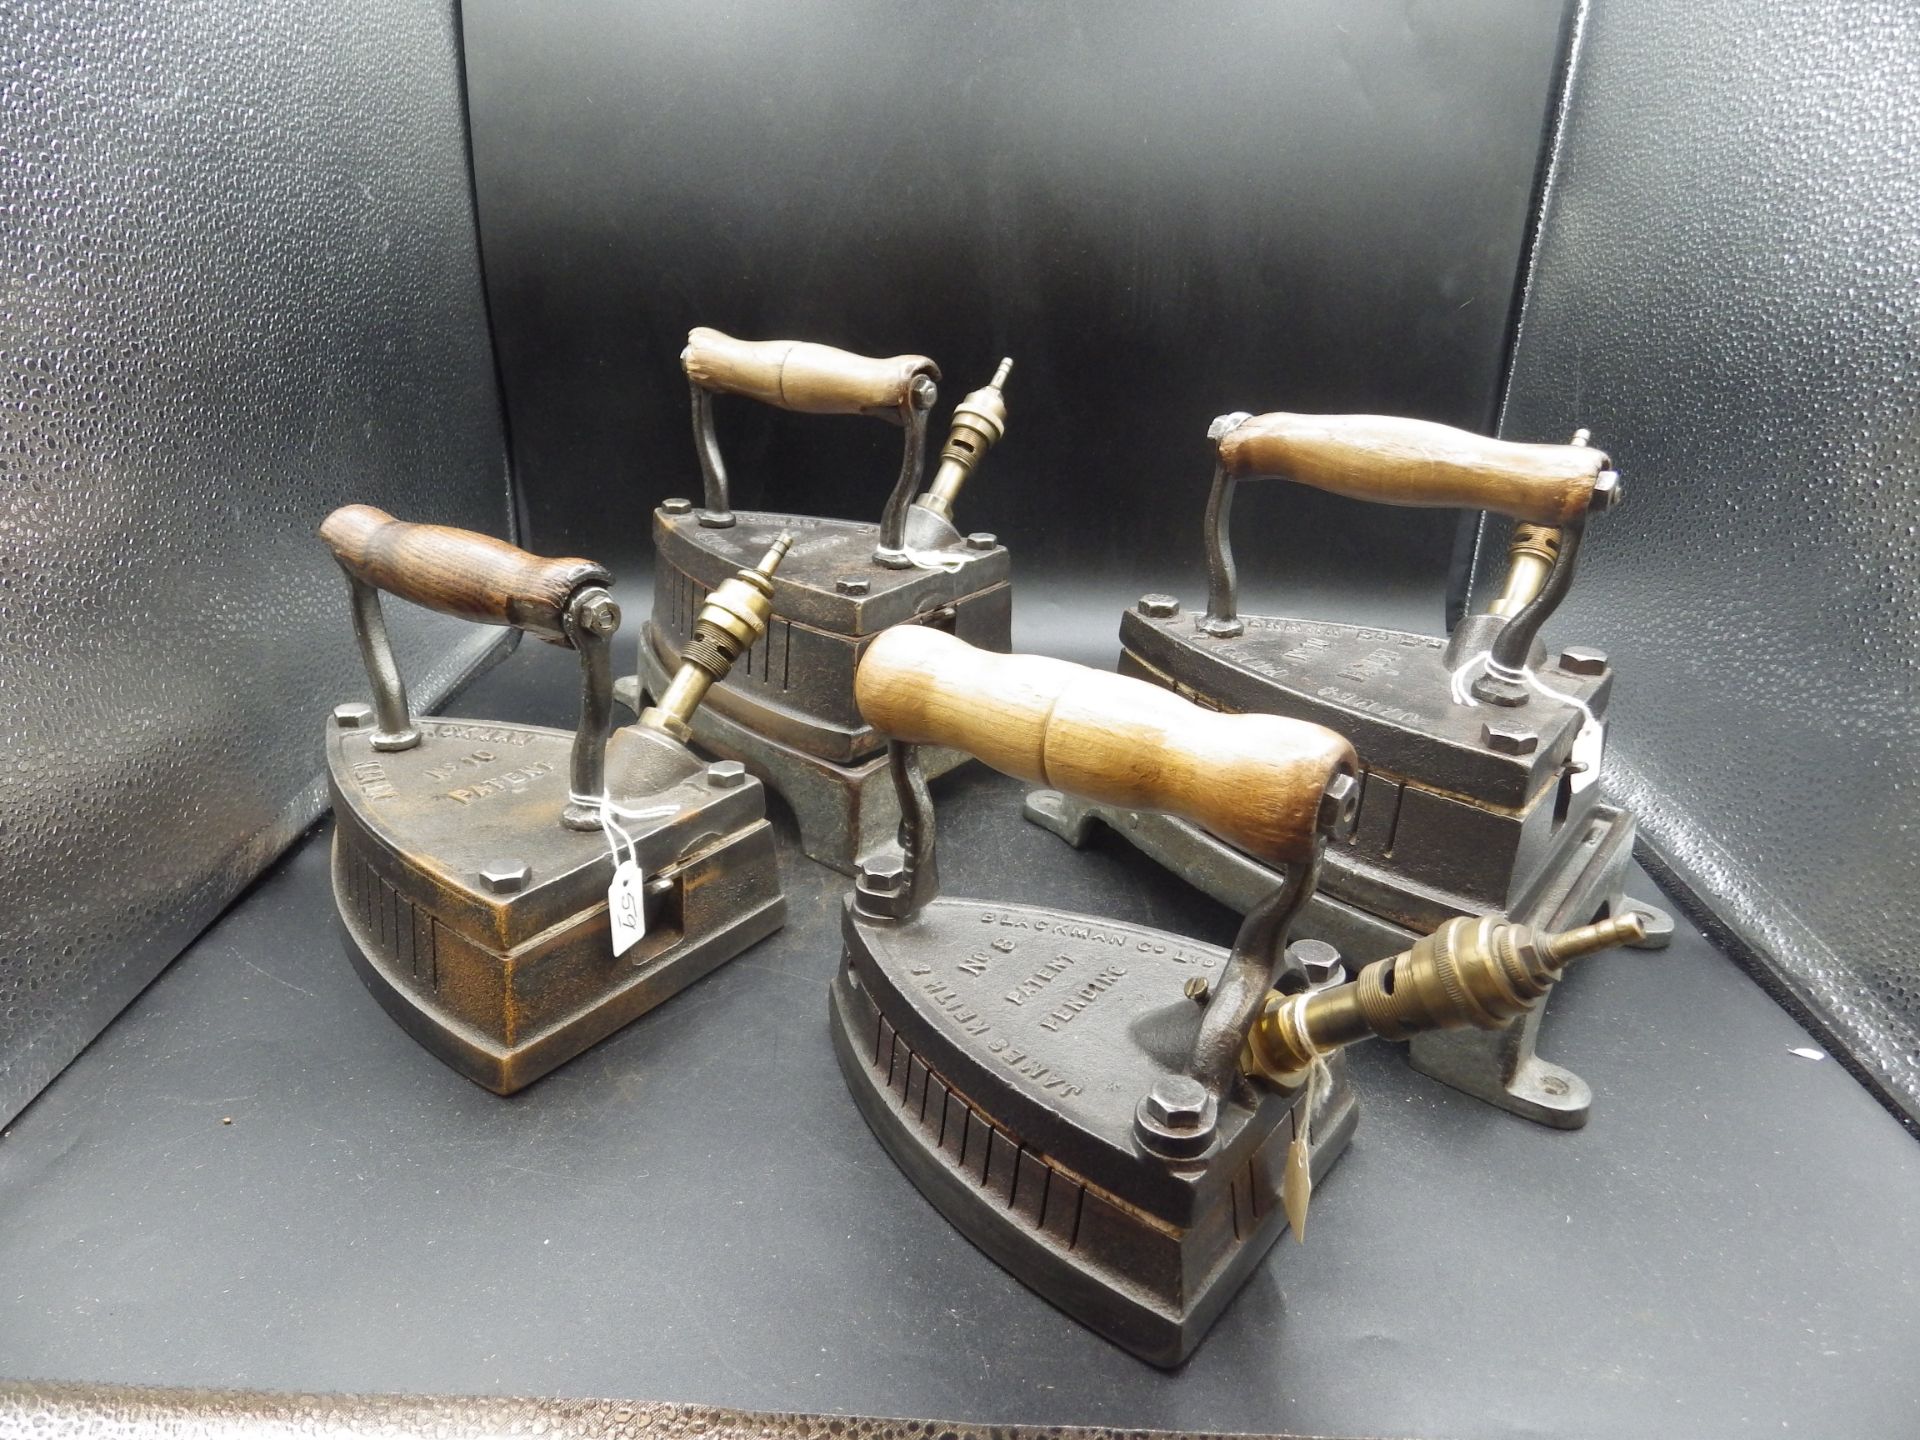 4 James Keith & Blackman Co ltd gas irons to incl No.8 patent pending, 2x No.10 one with trivet - Image 2 of 4